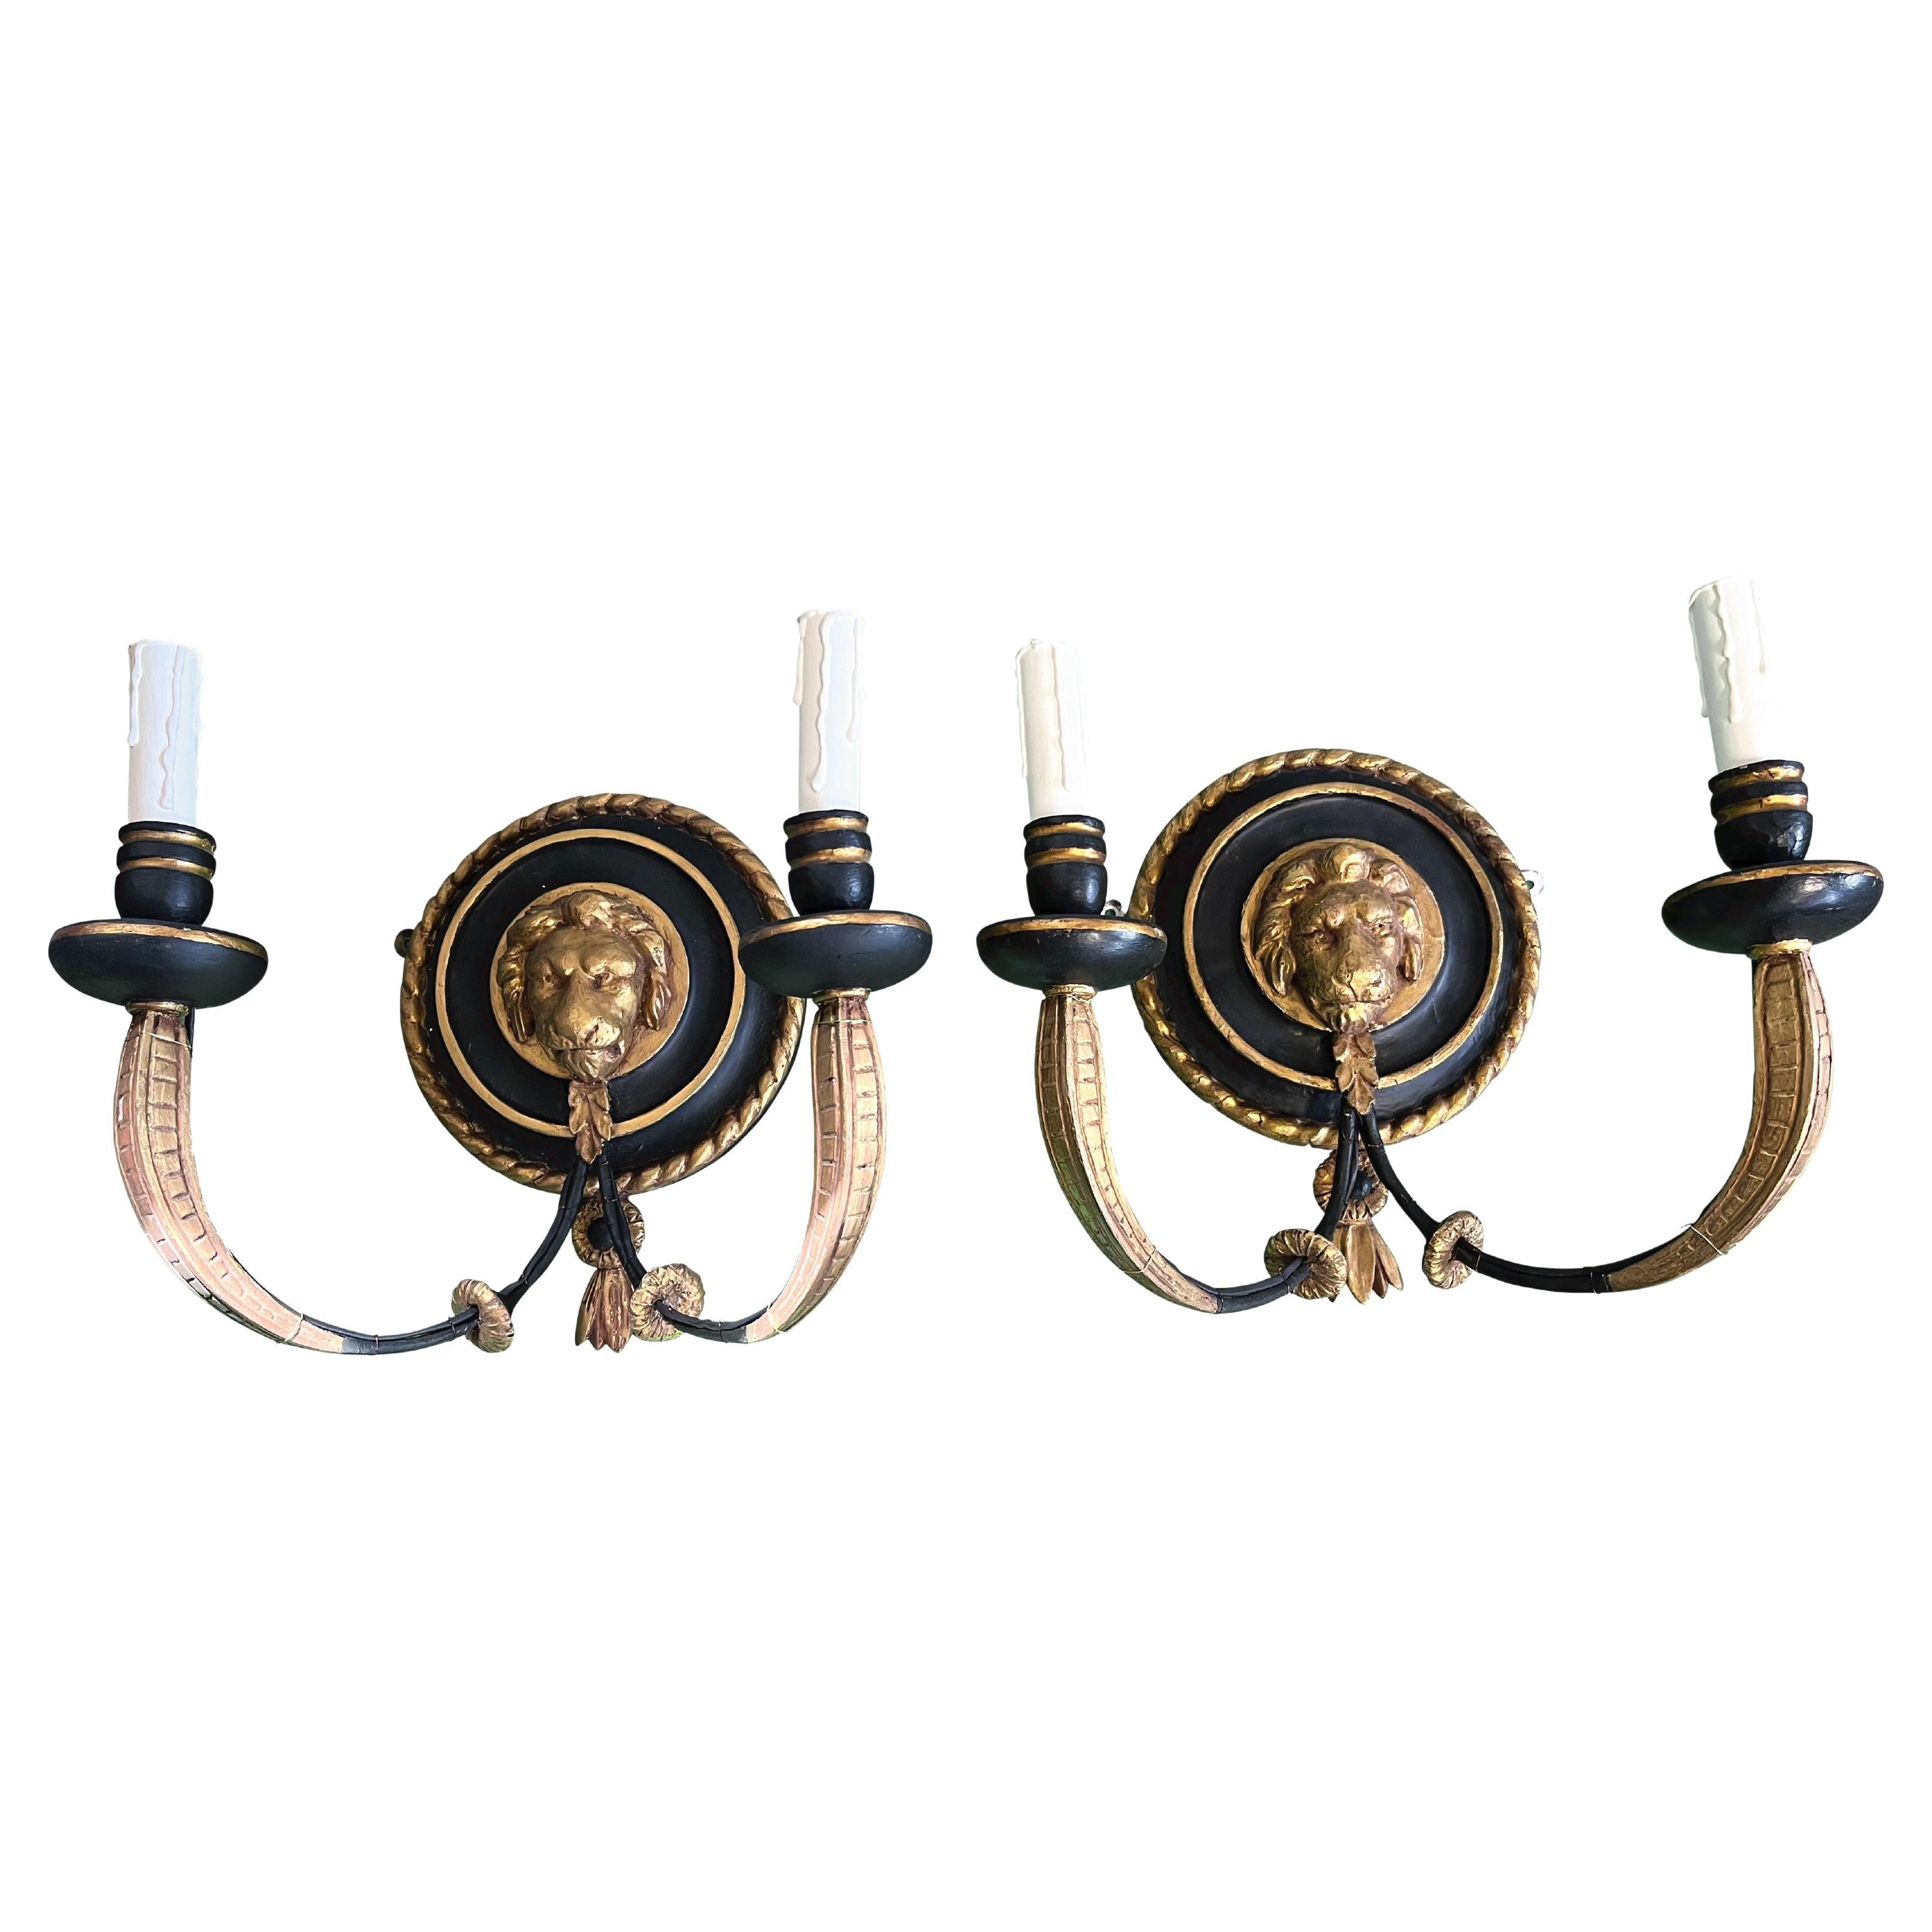 Set of Four 19th Century Regency Carved Ebonized & Gilt Lions Head Wall Lights For Sale